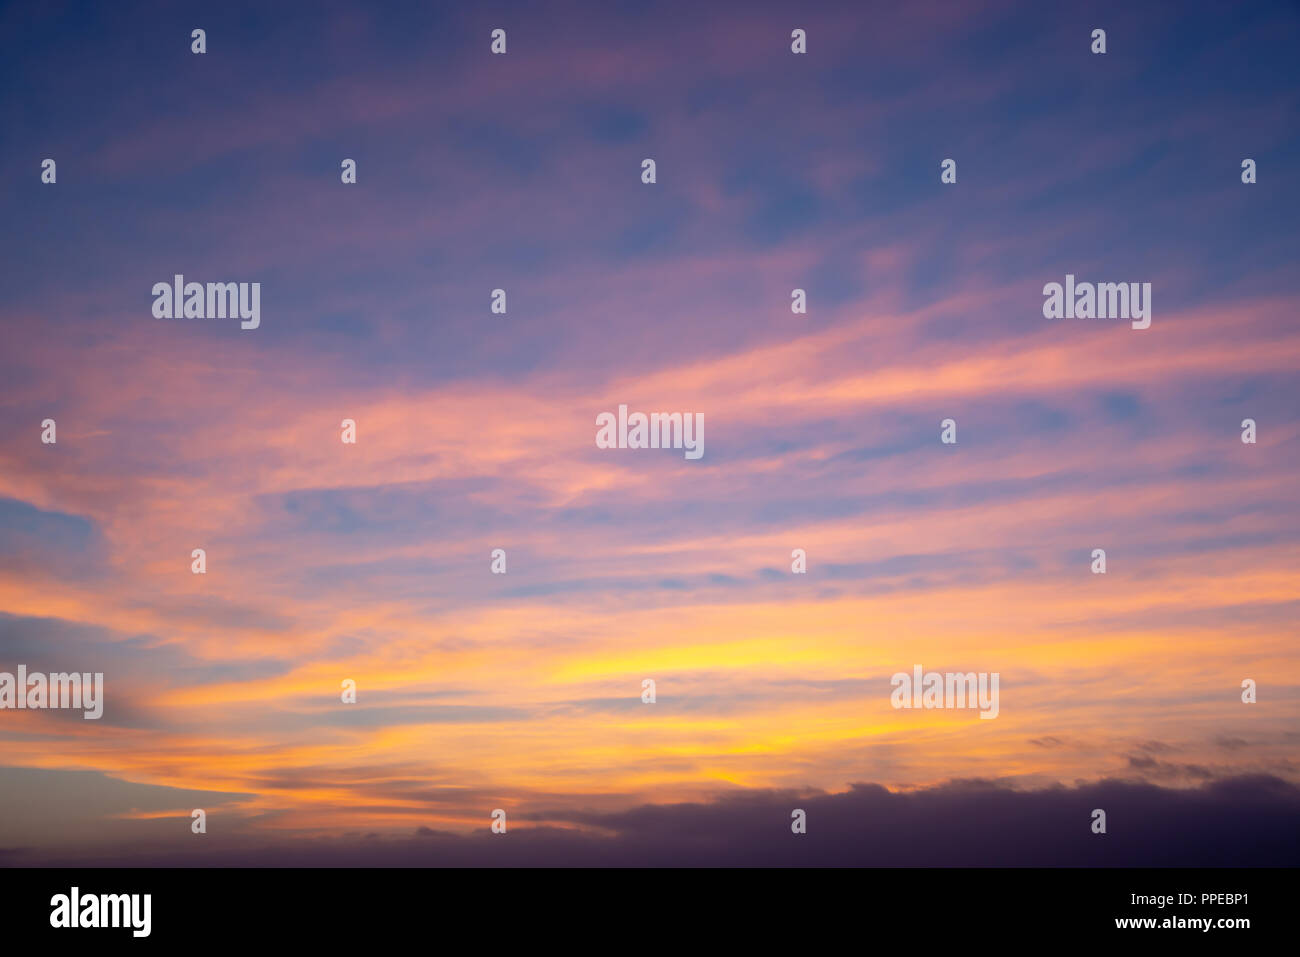 Colorful sky with clouds at sunset Stock Photo